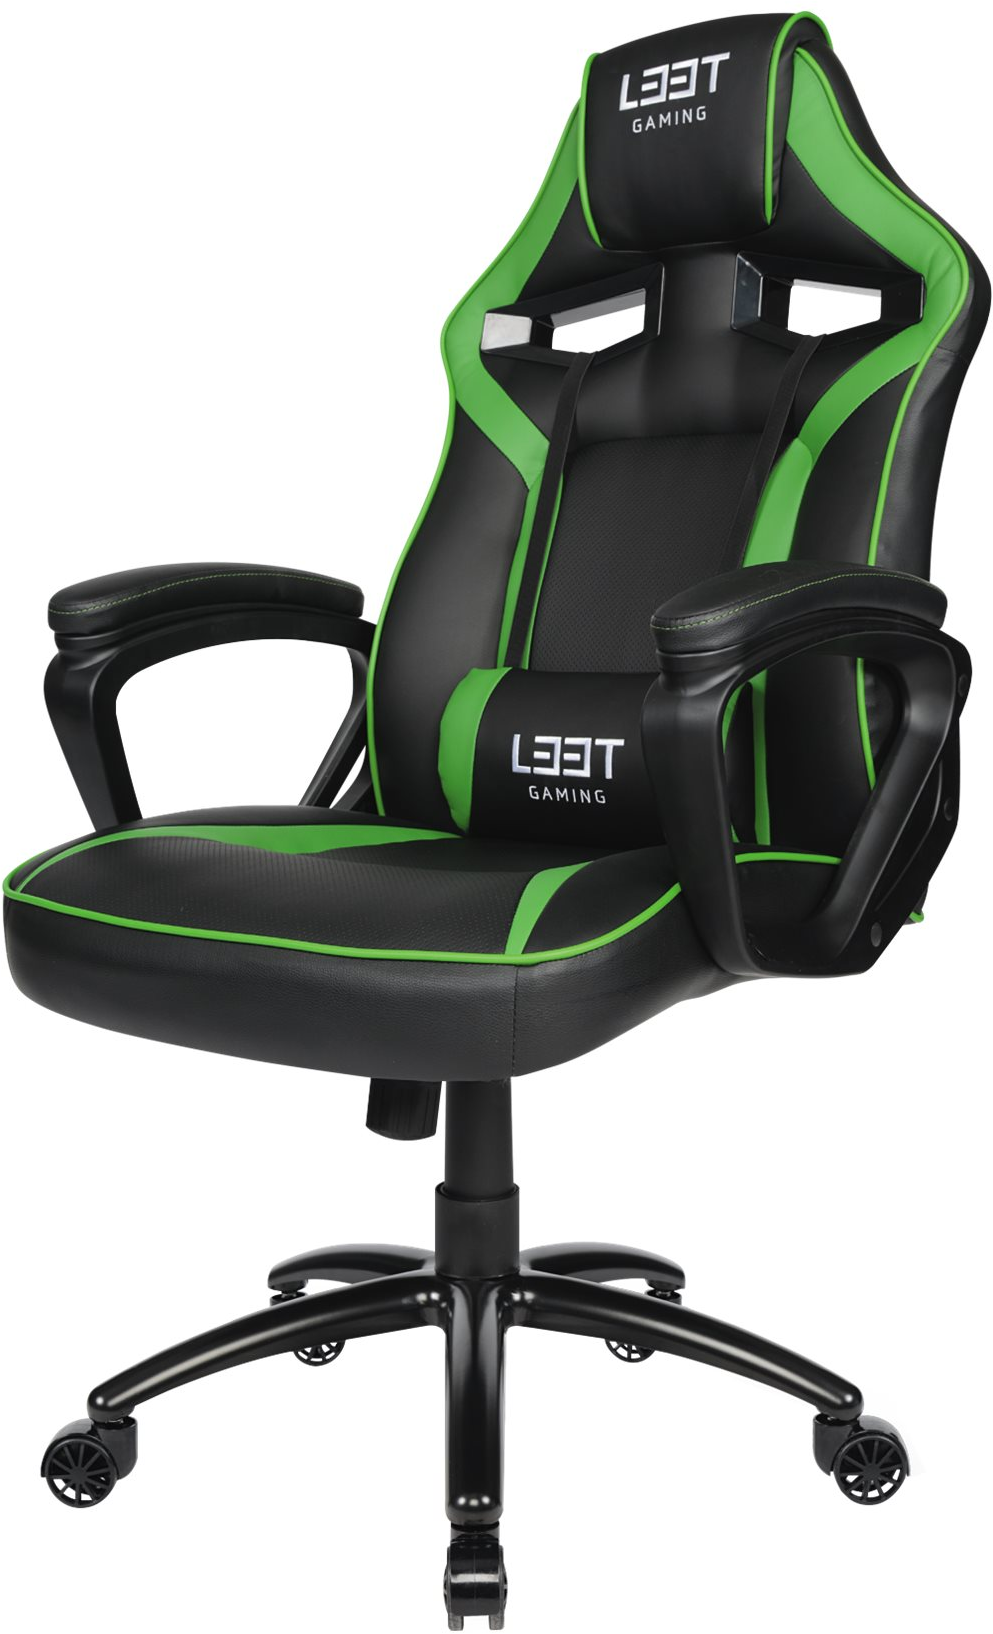 5706470075498 L33T Extreme Gaming stol - grøn - Gaming stol Computer & IT,Gaming,Gaming stole 74600160567 EXTR-GREEN